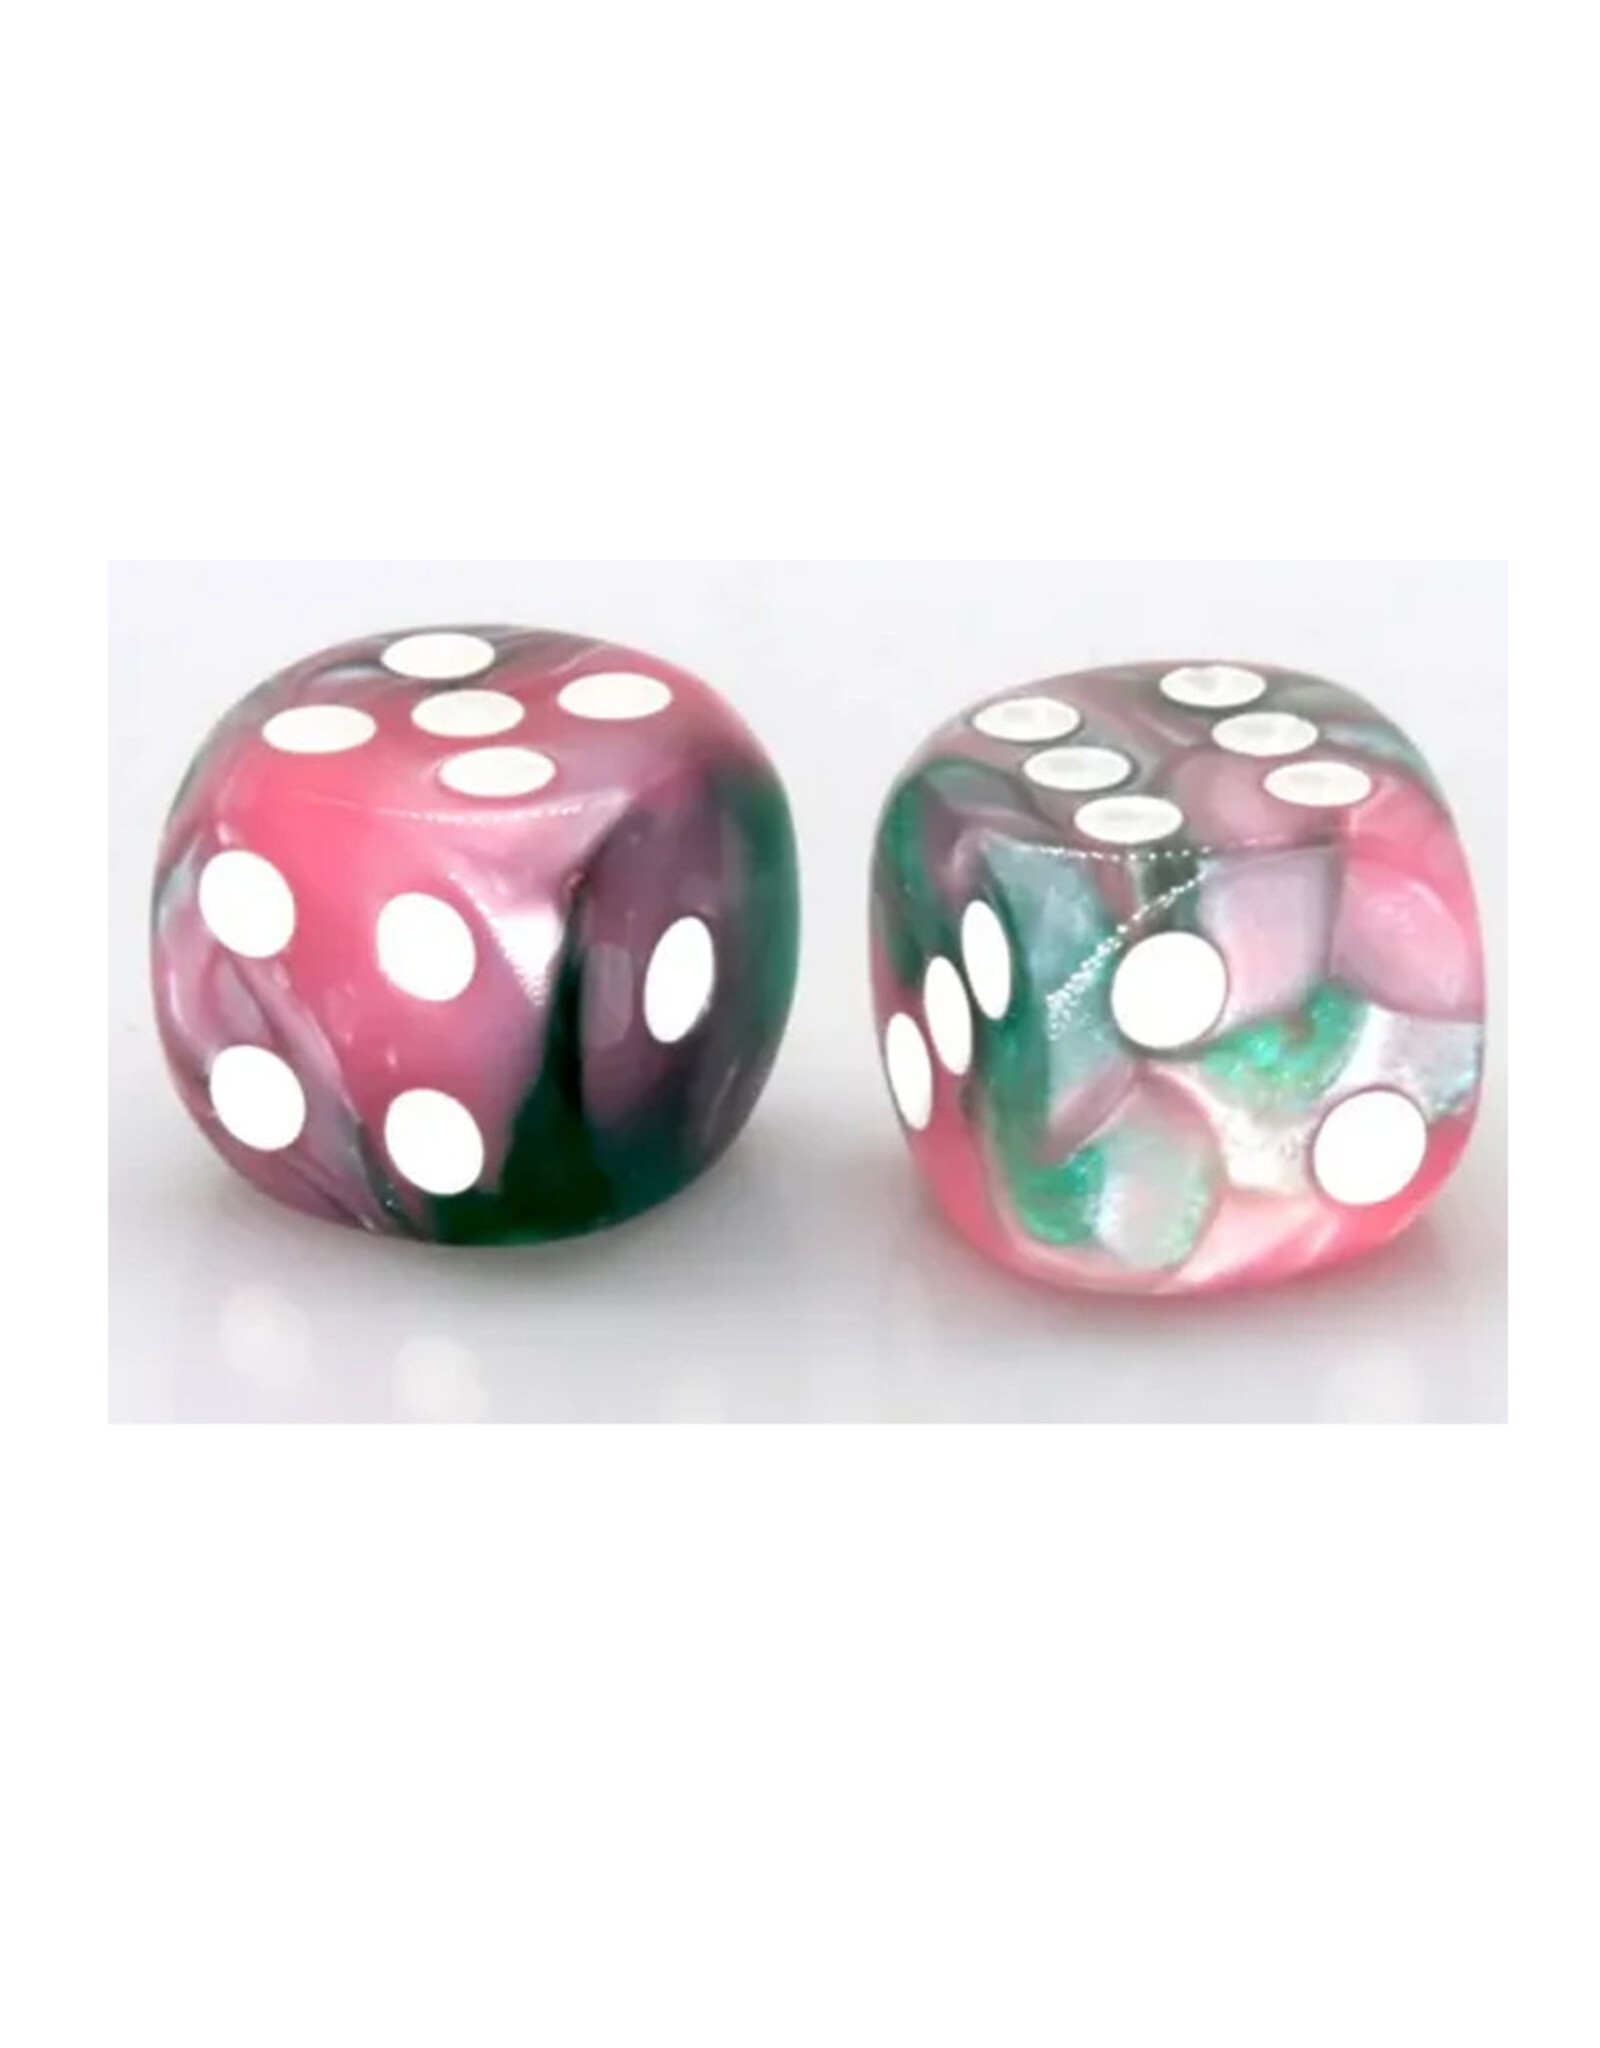 Foam Brain 12 Piece D6 Set: Pink and Green Pearlescent RPG Dice